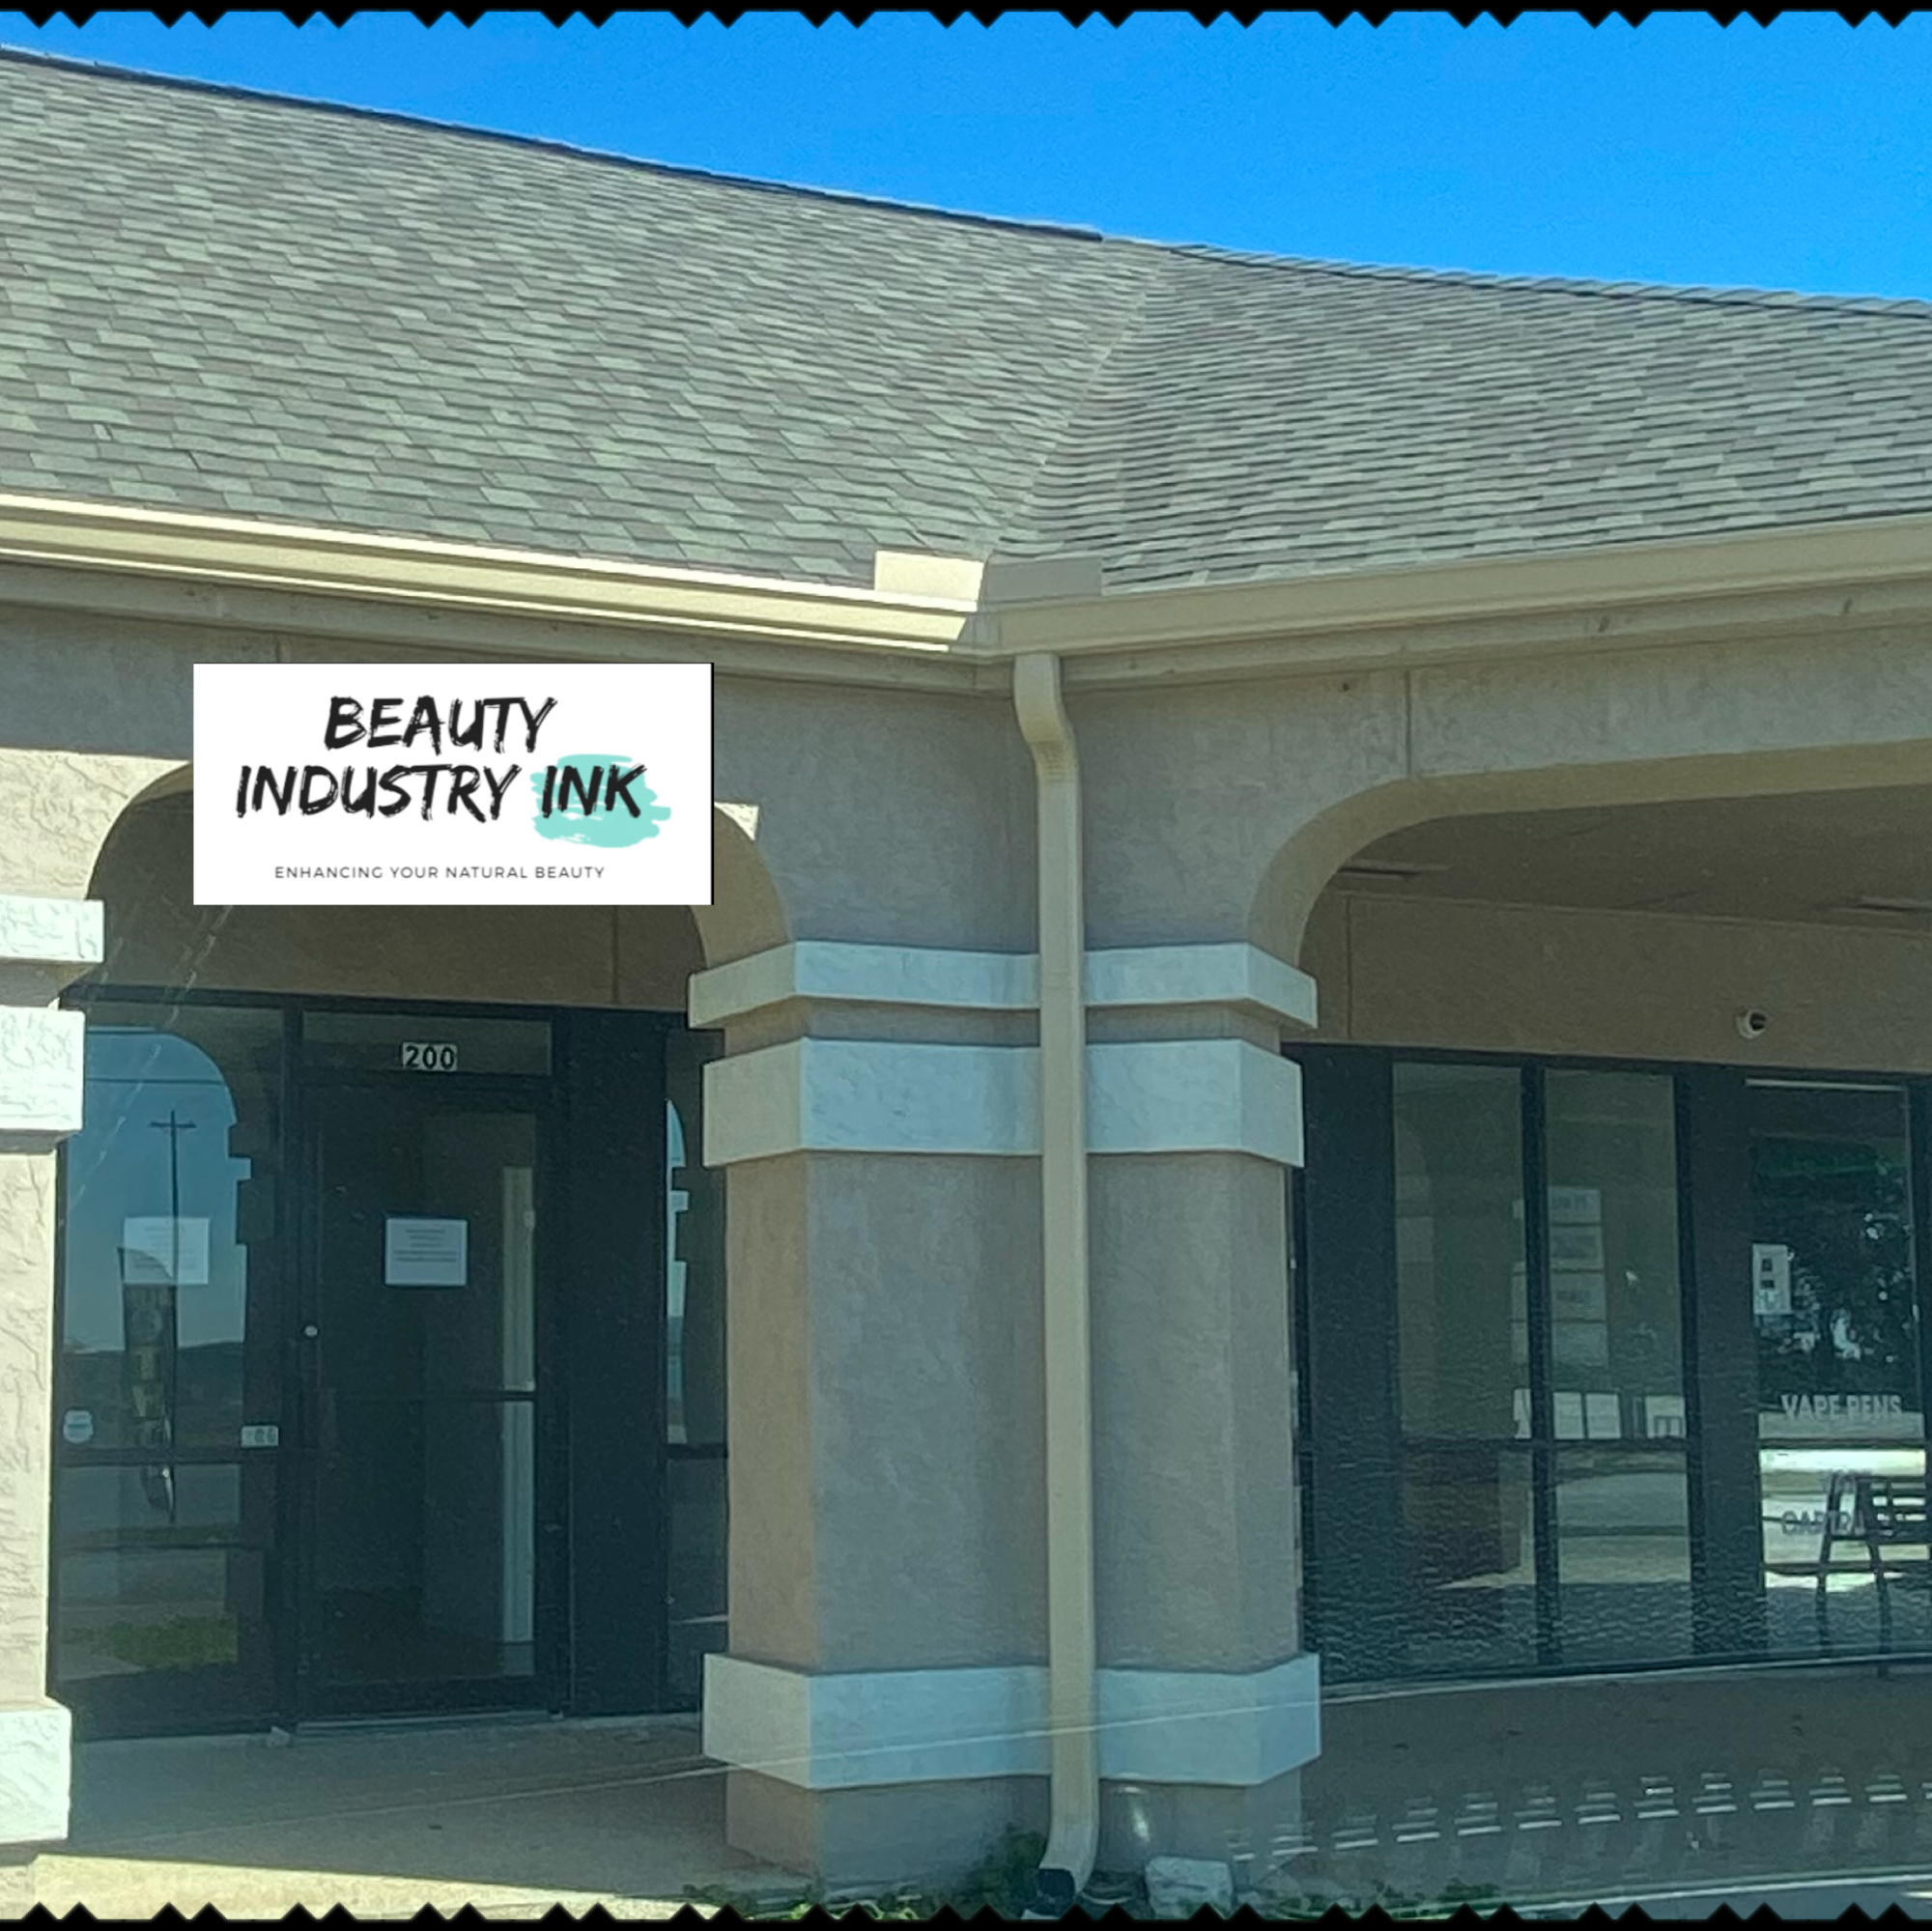 Beauty Industry Ink 18200 FM306 Suite 200, Canyon Lake Texas 78133